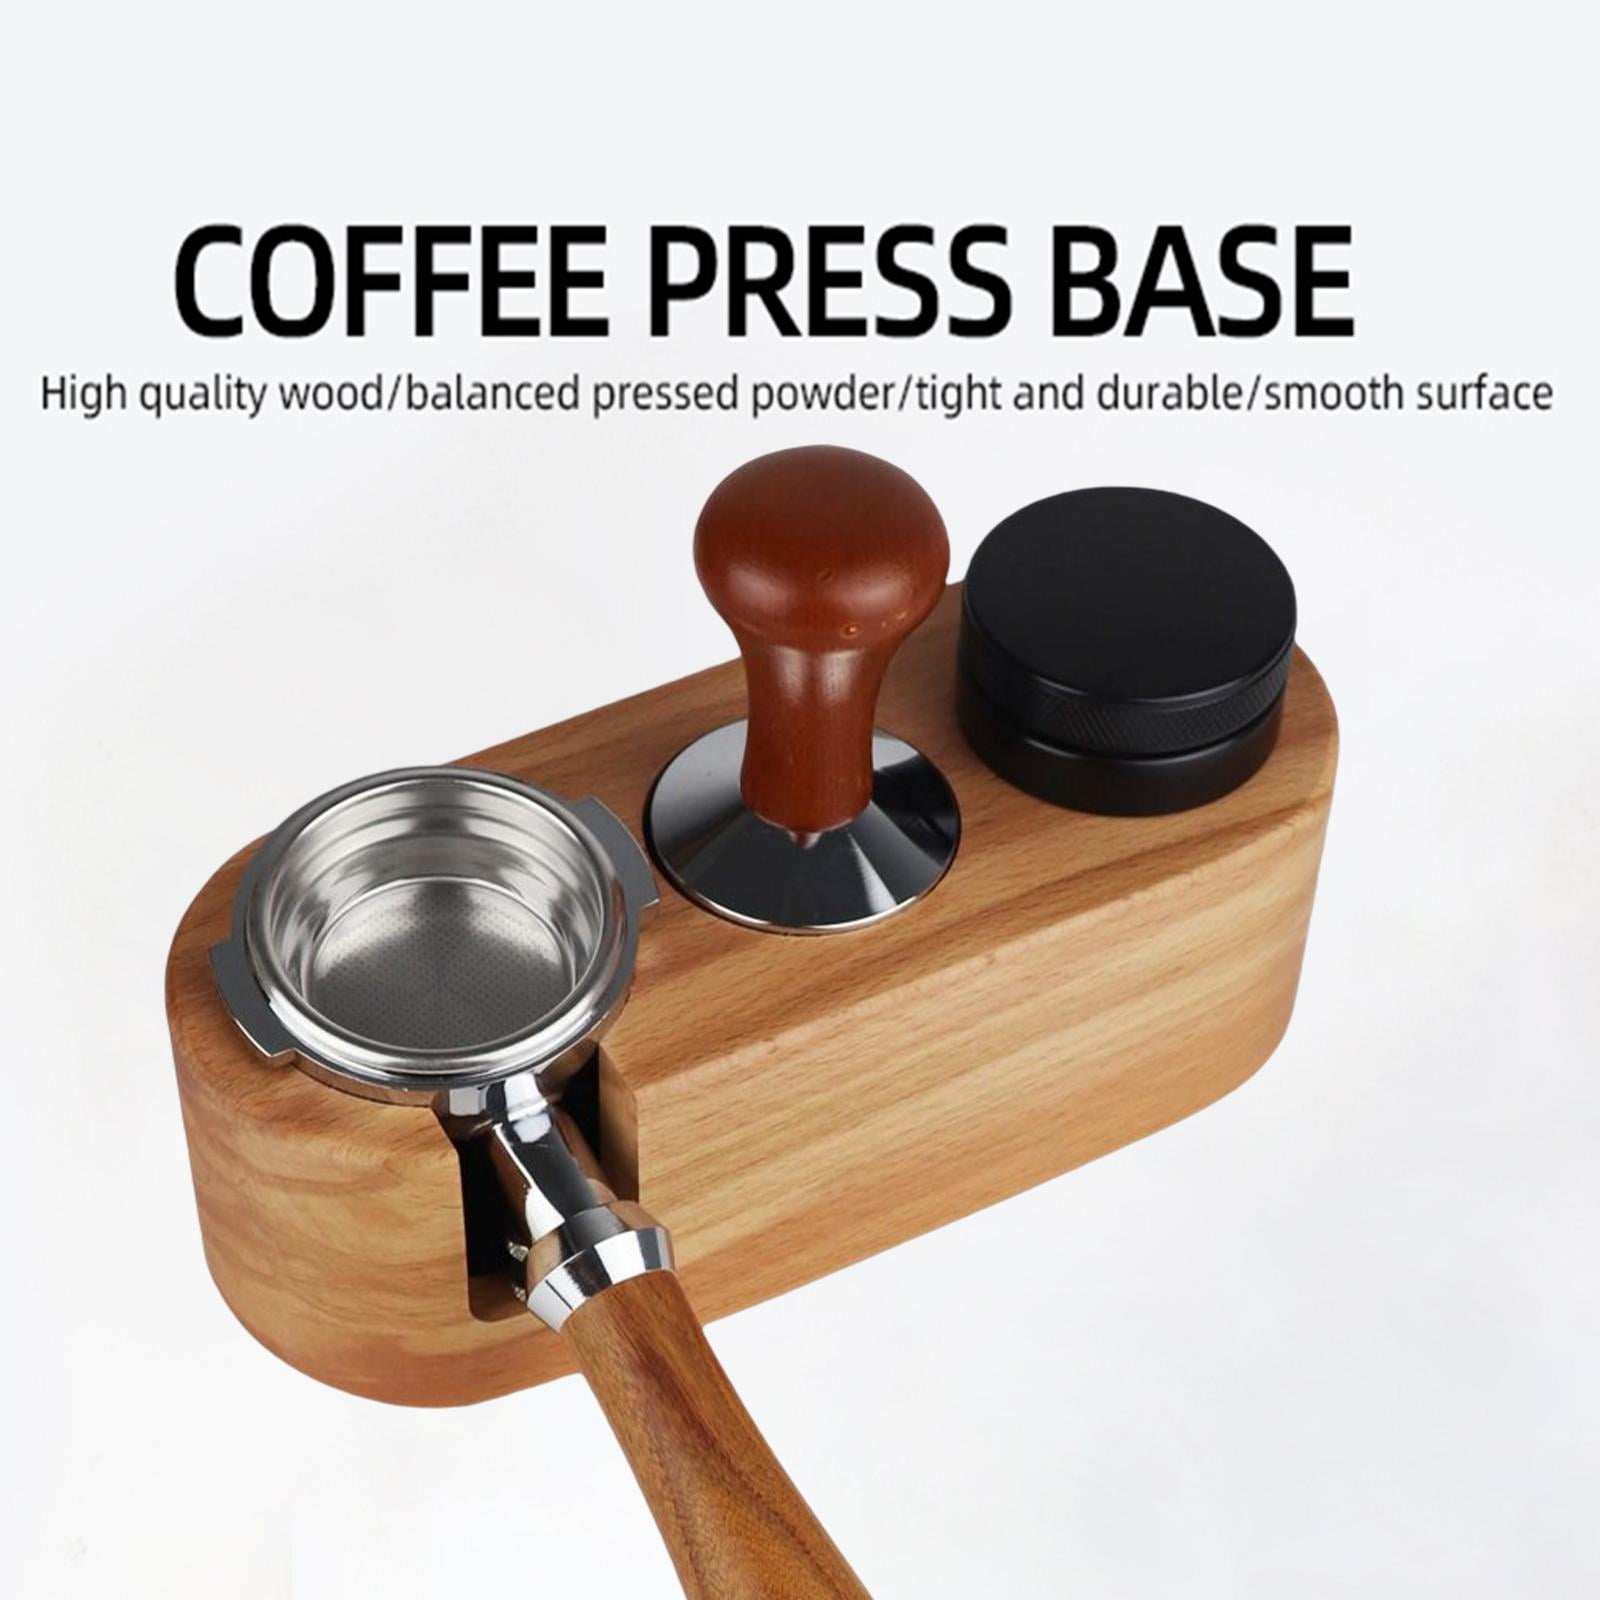 Espresso Accessories Kits Espresso Stand Set Barista Part Multipurpose  Coffee Tamper Distributor and Stirring for Counters Shop Cafe wood 51mm